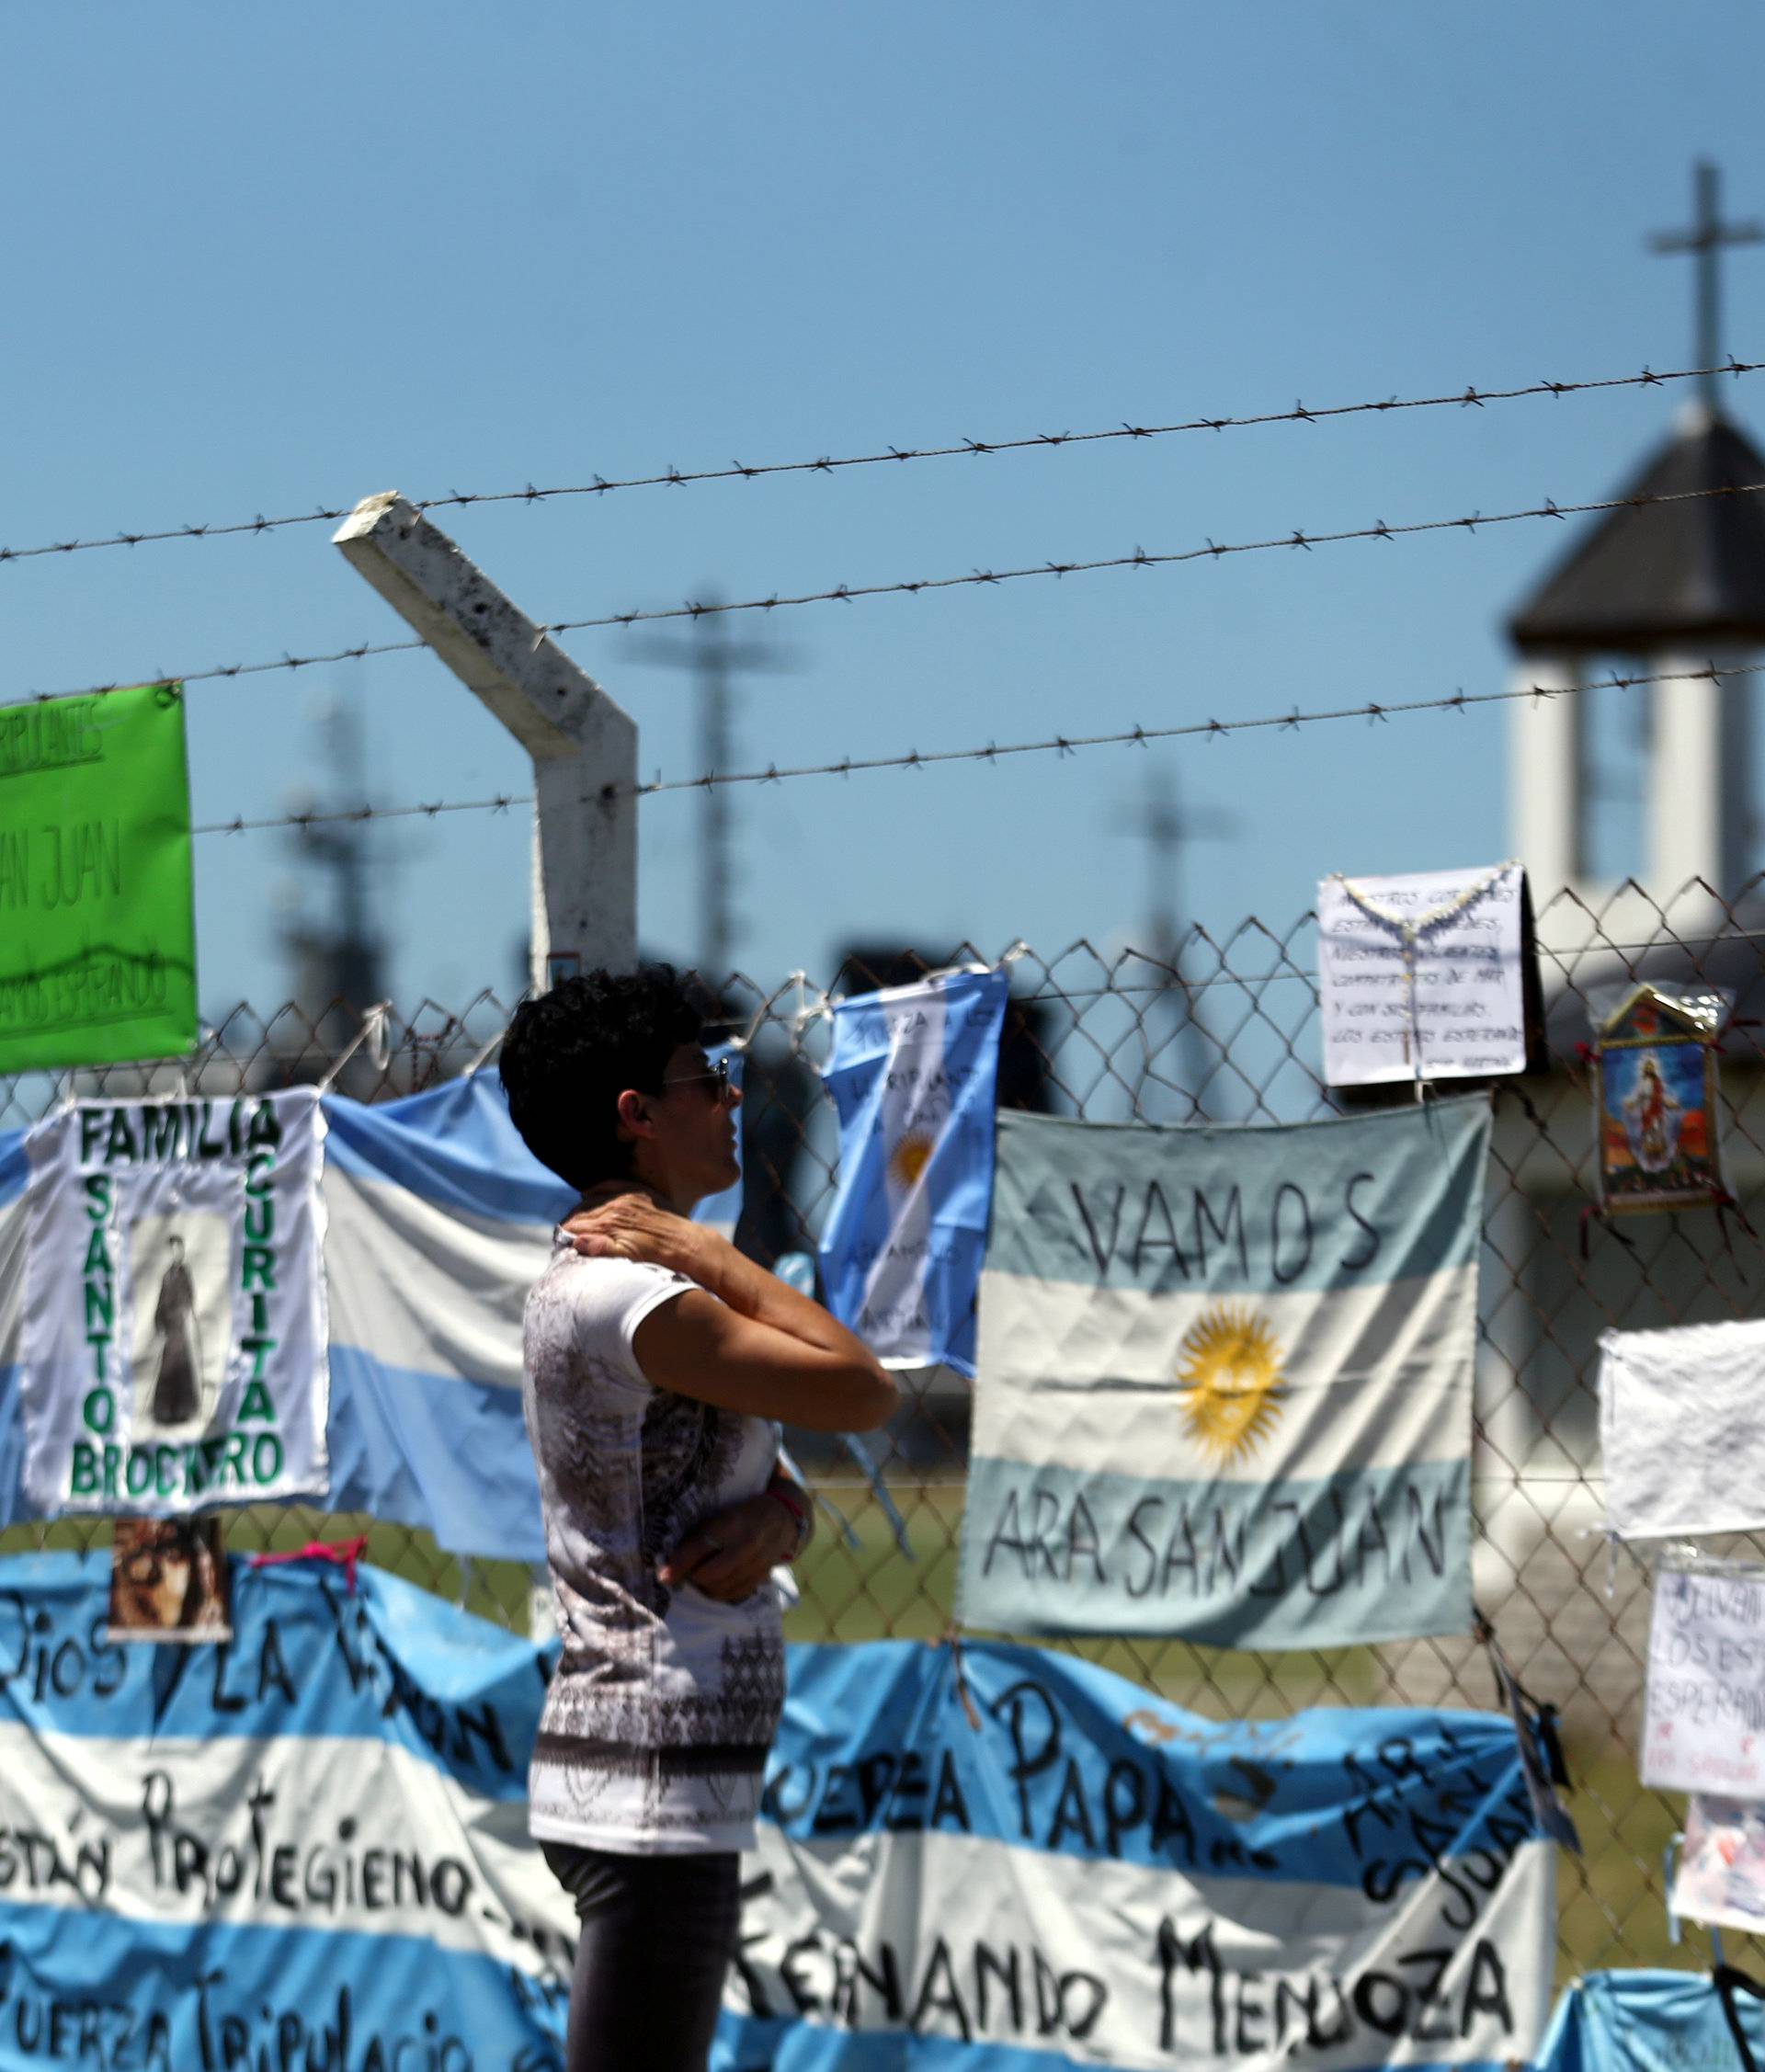 A woman looks at messages and signs in support of the 44 crew members of the missing at sea ARA San Juan submarine, placed on a fence at an Argentine Naval Base in Mar del Plata